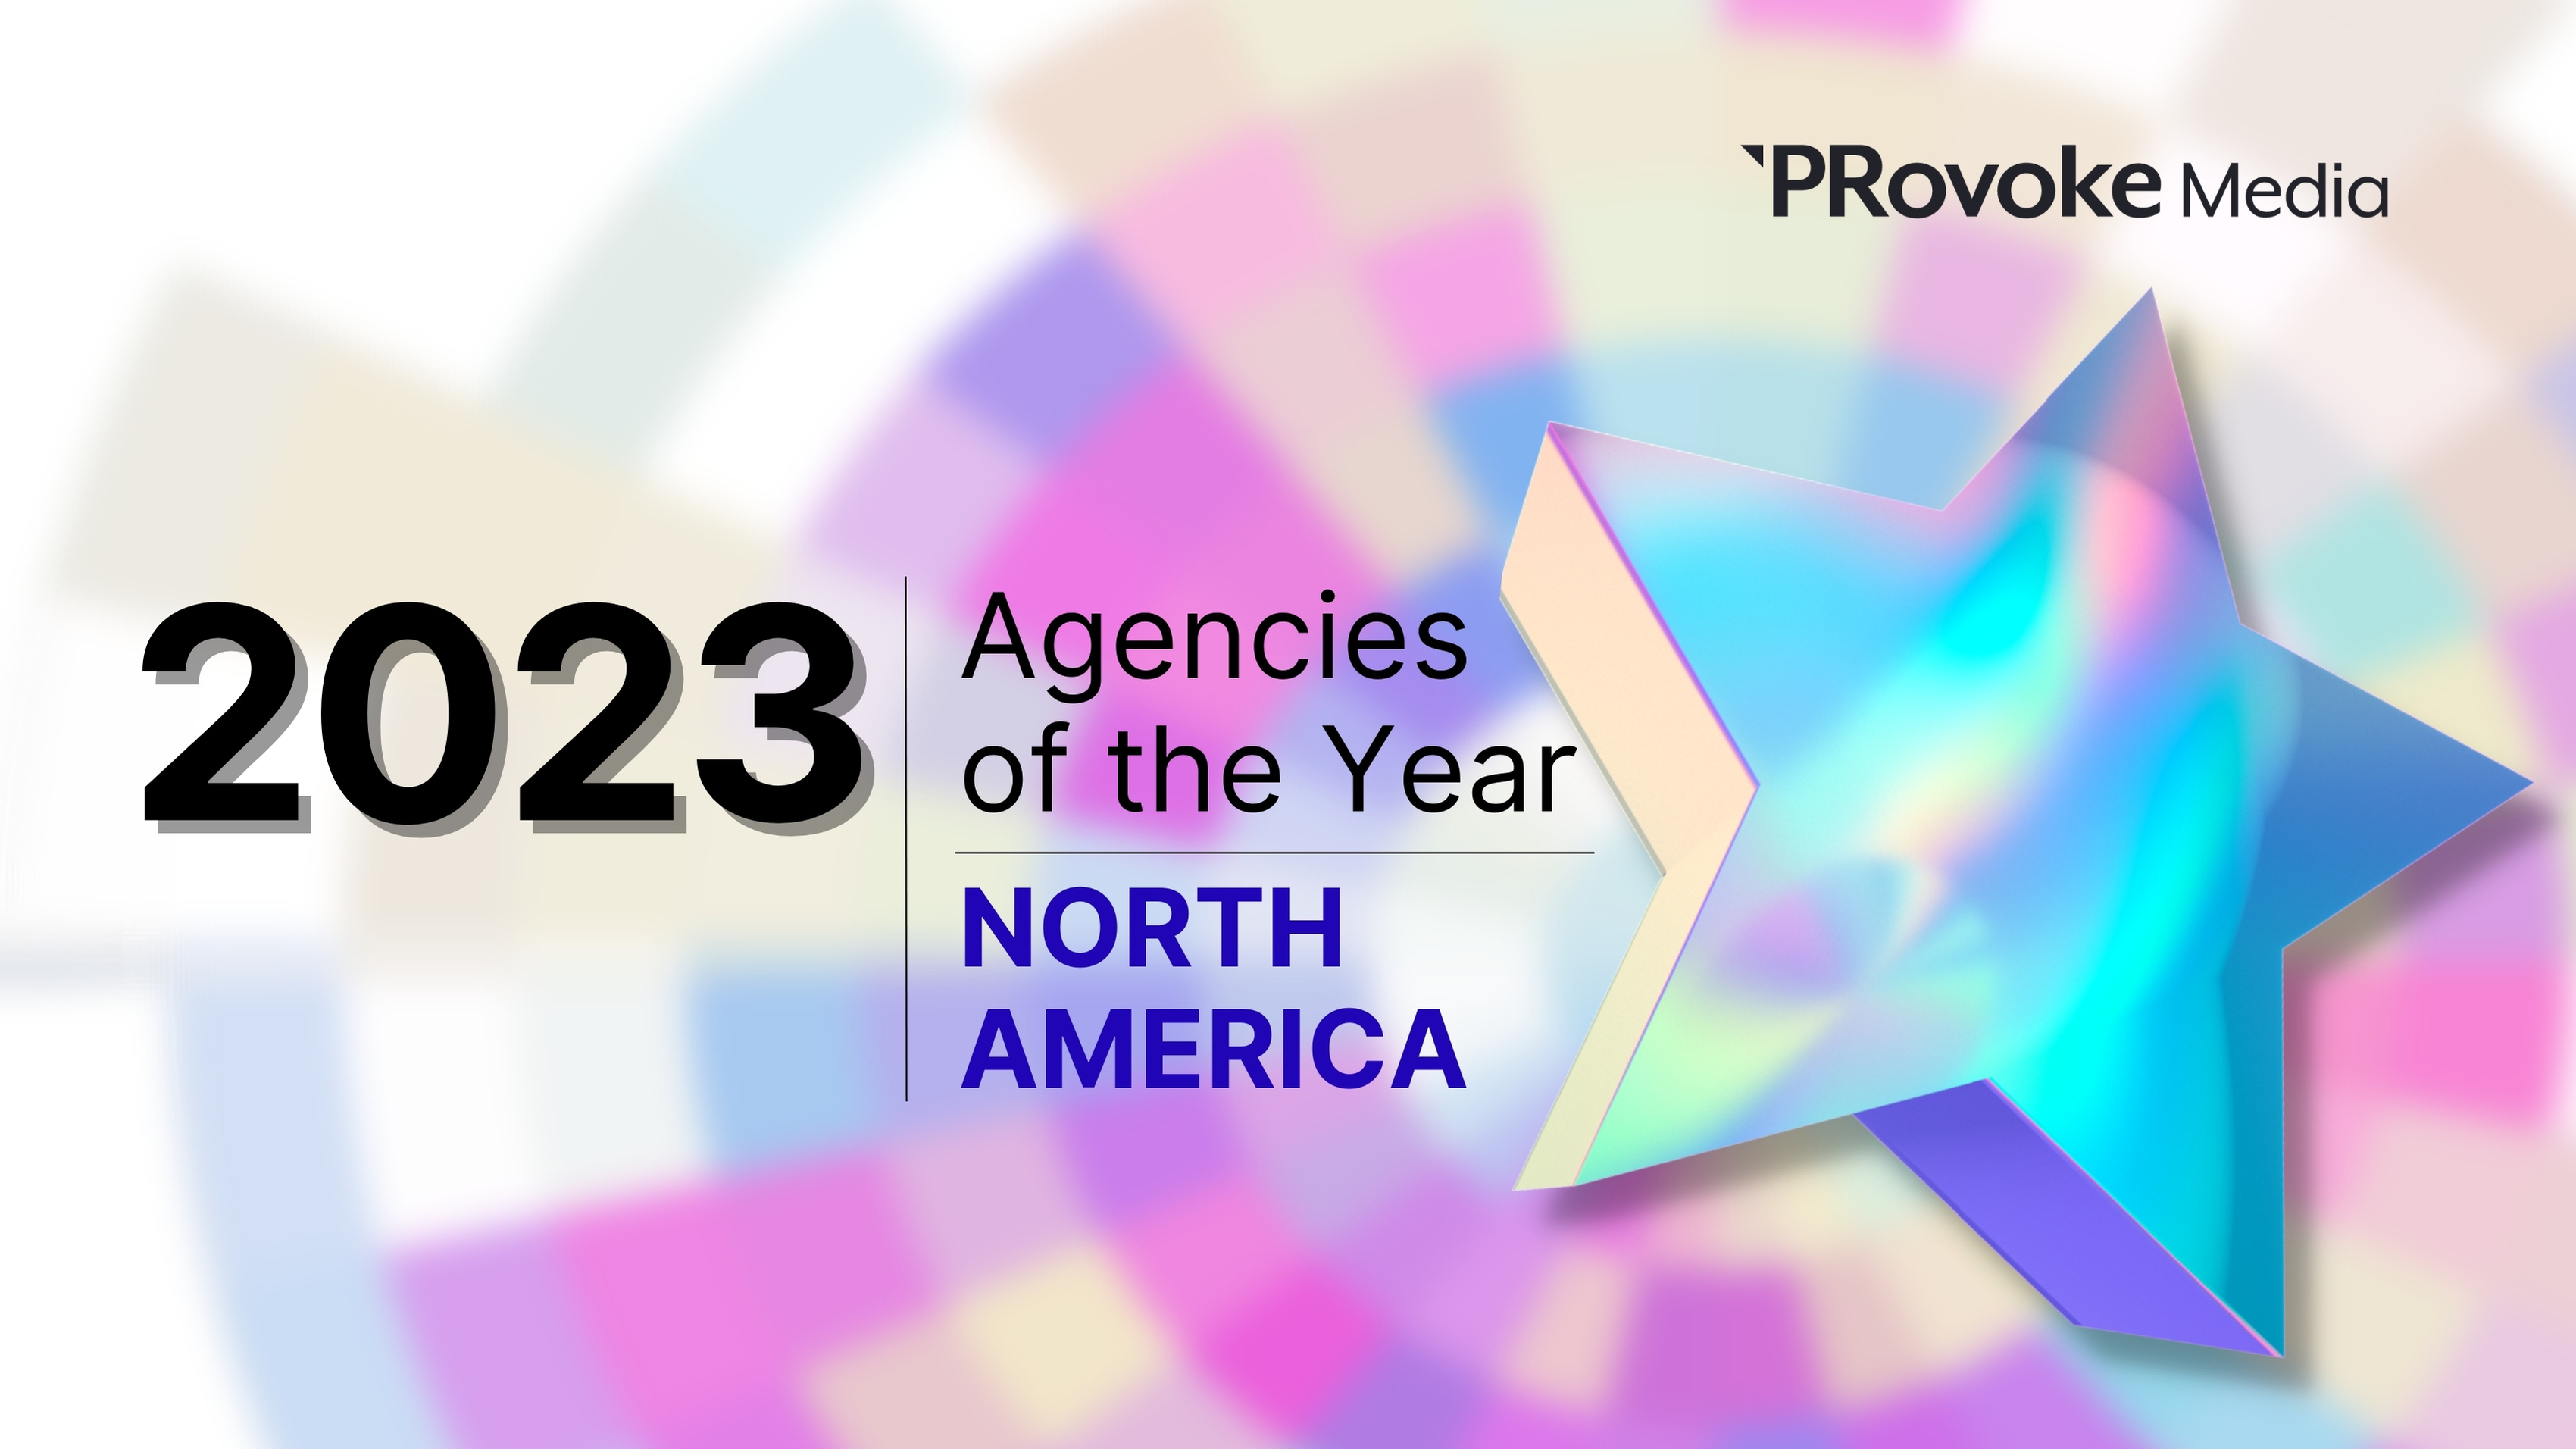 2023 Technology Agencies of the Year, North America PRovoke Media